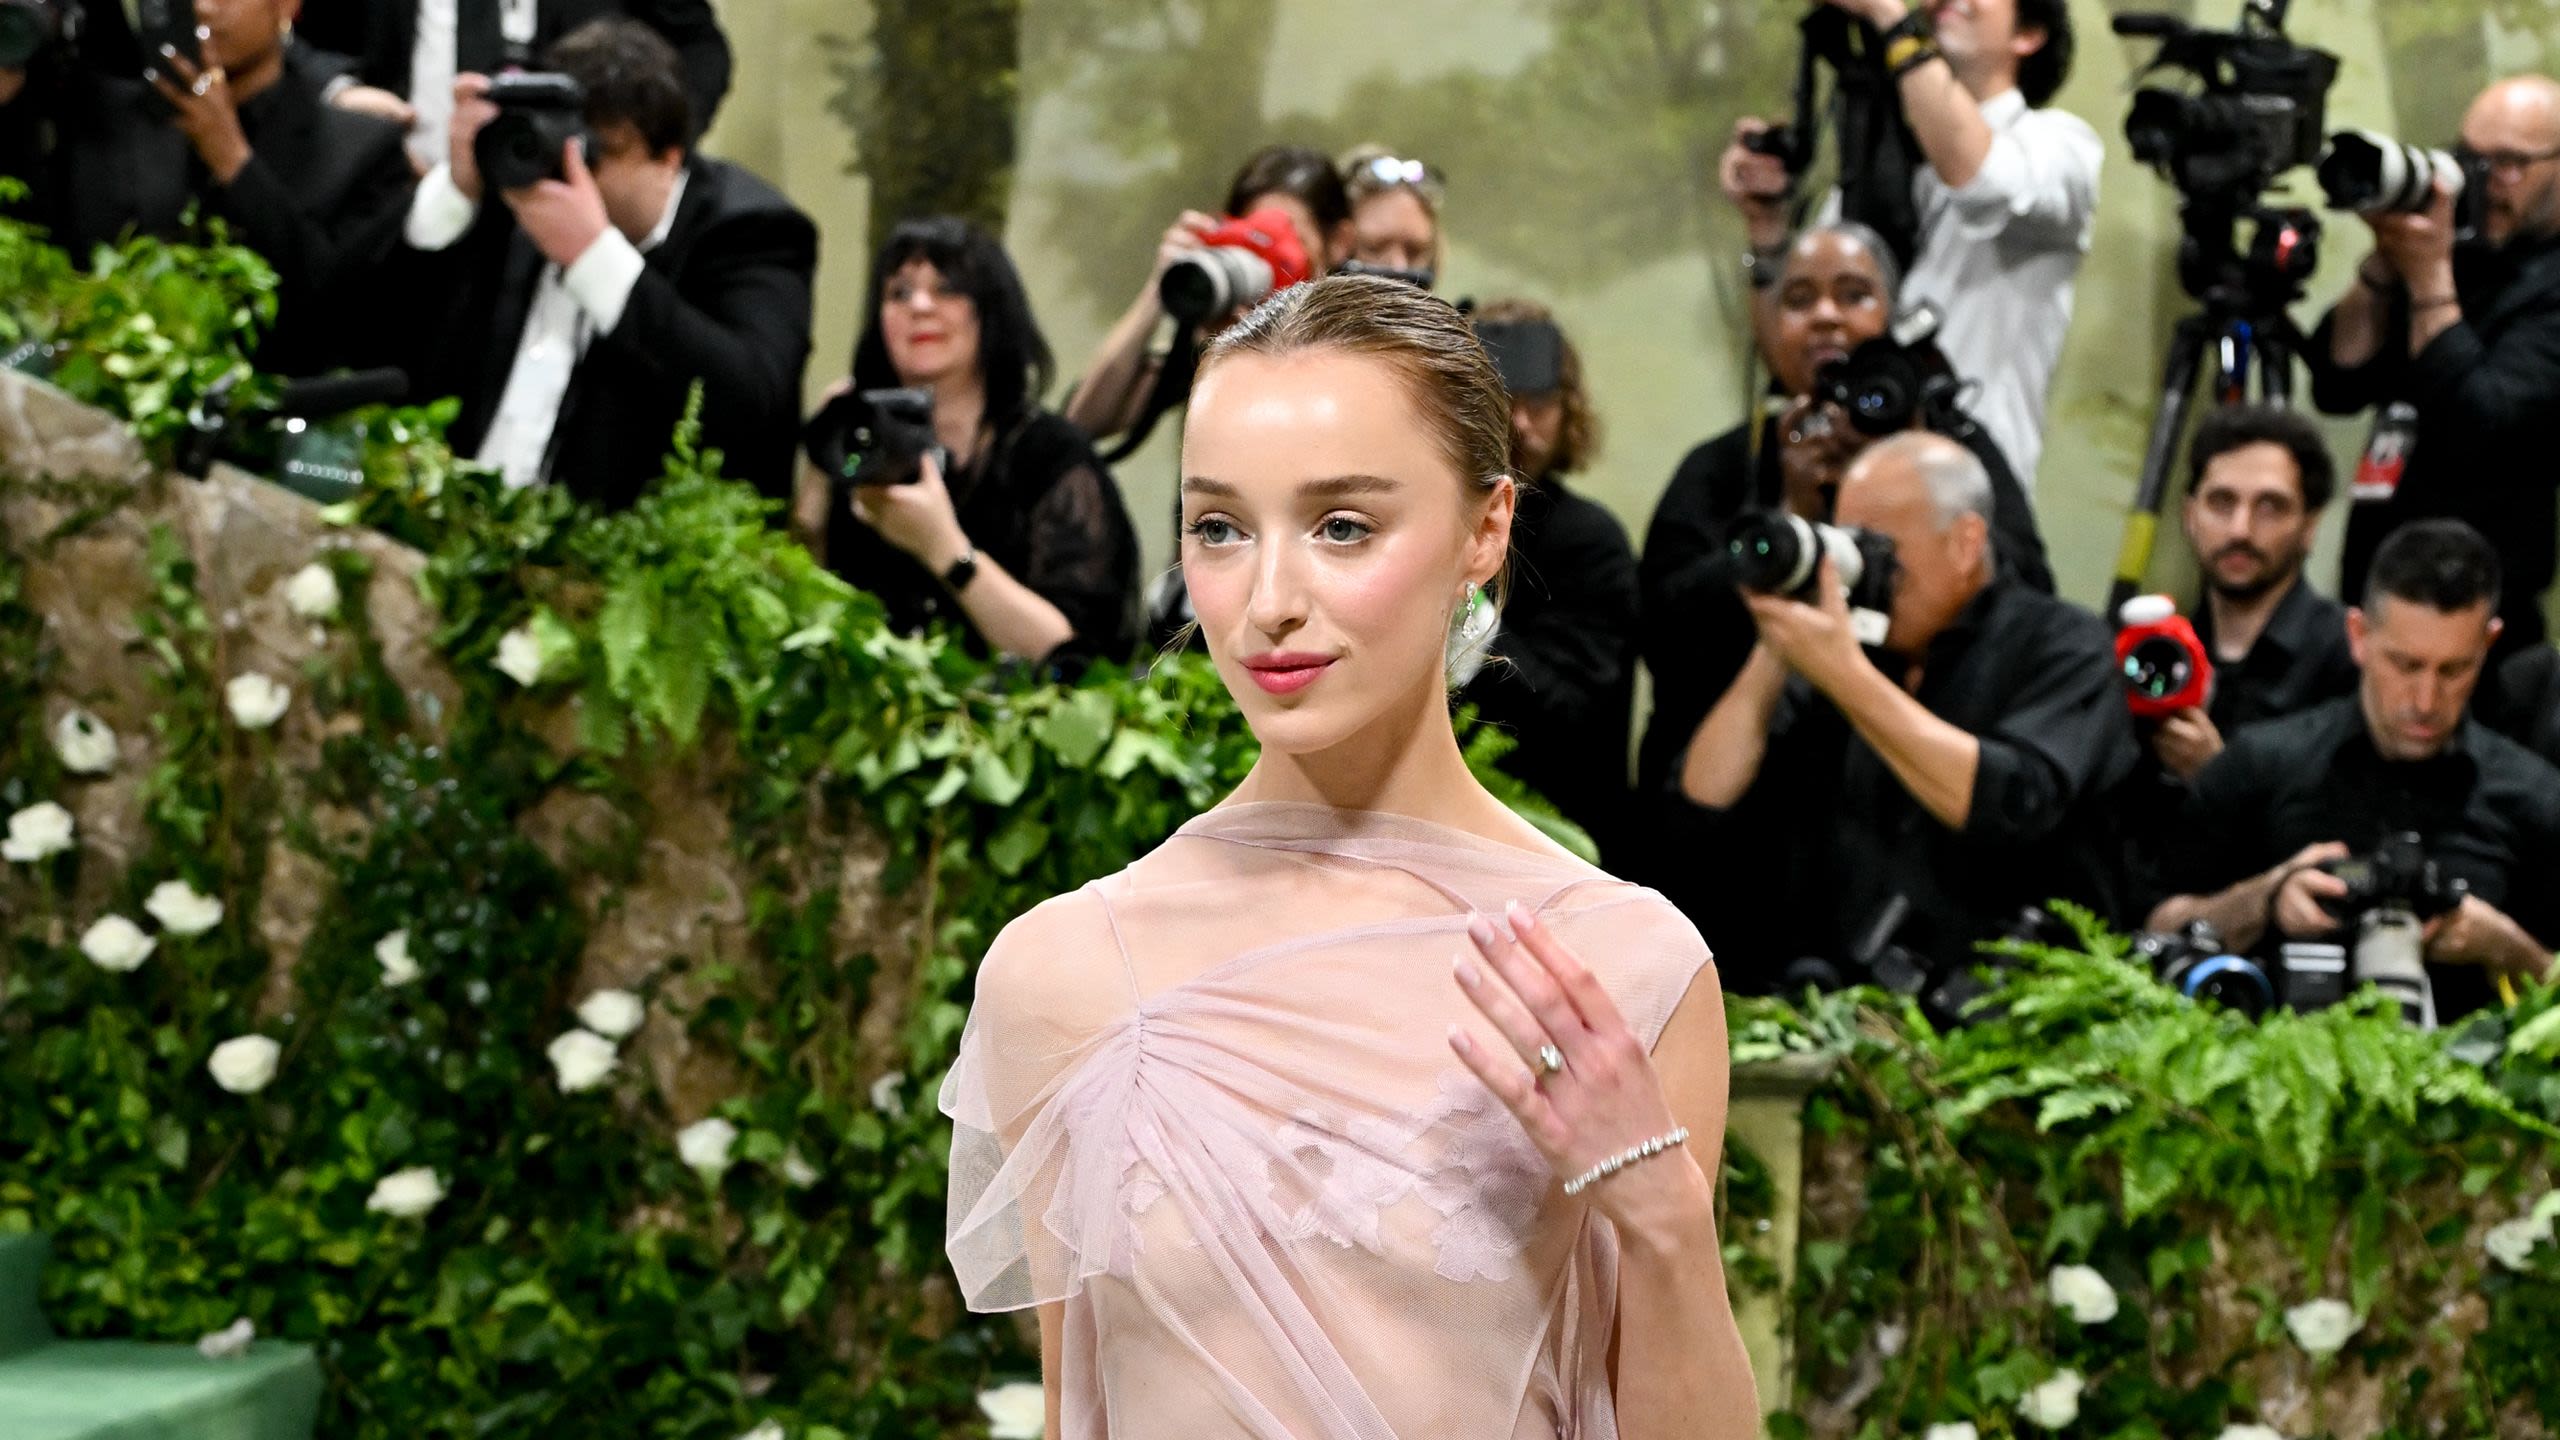 Bridgerton's Phoebe Dynevor Quietly Debuted Her Engagement Ring at the Met Gala